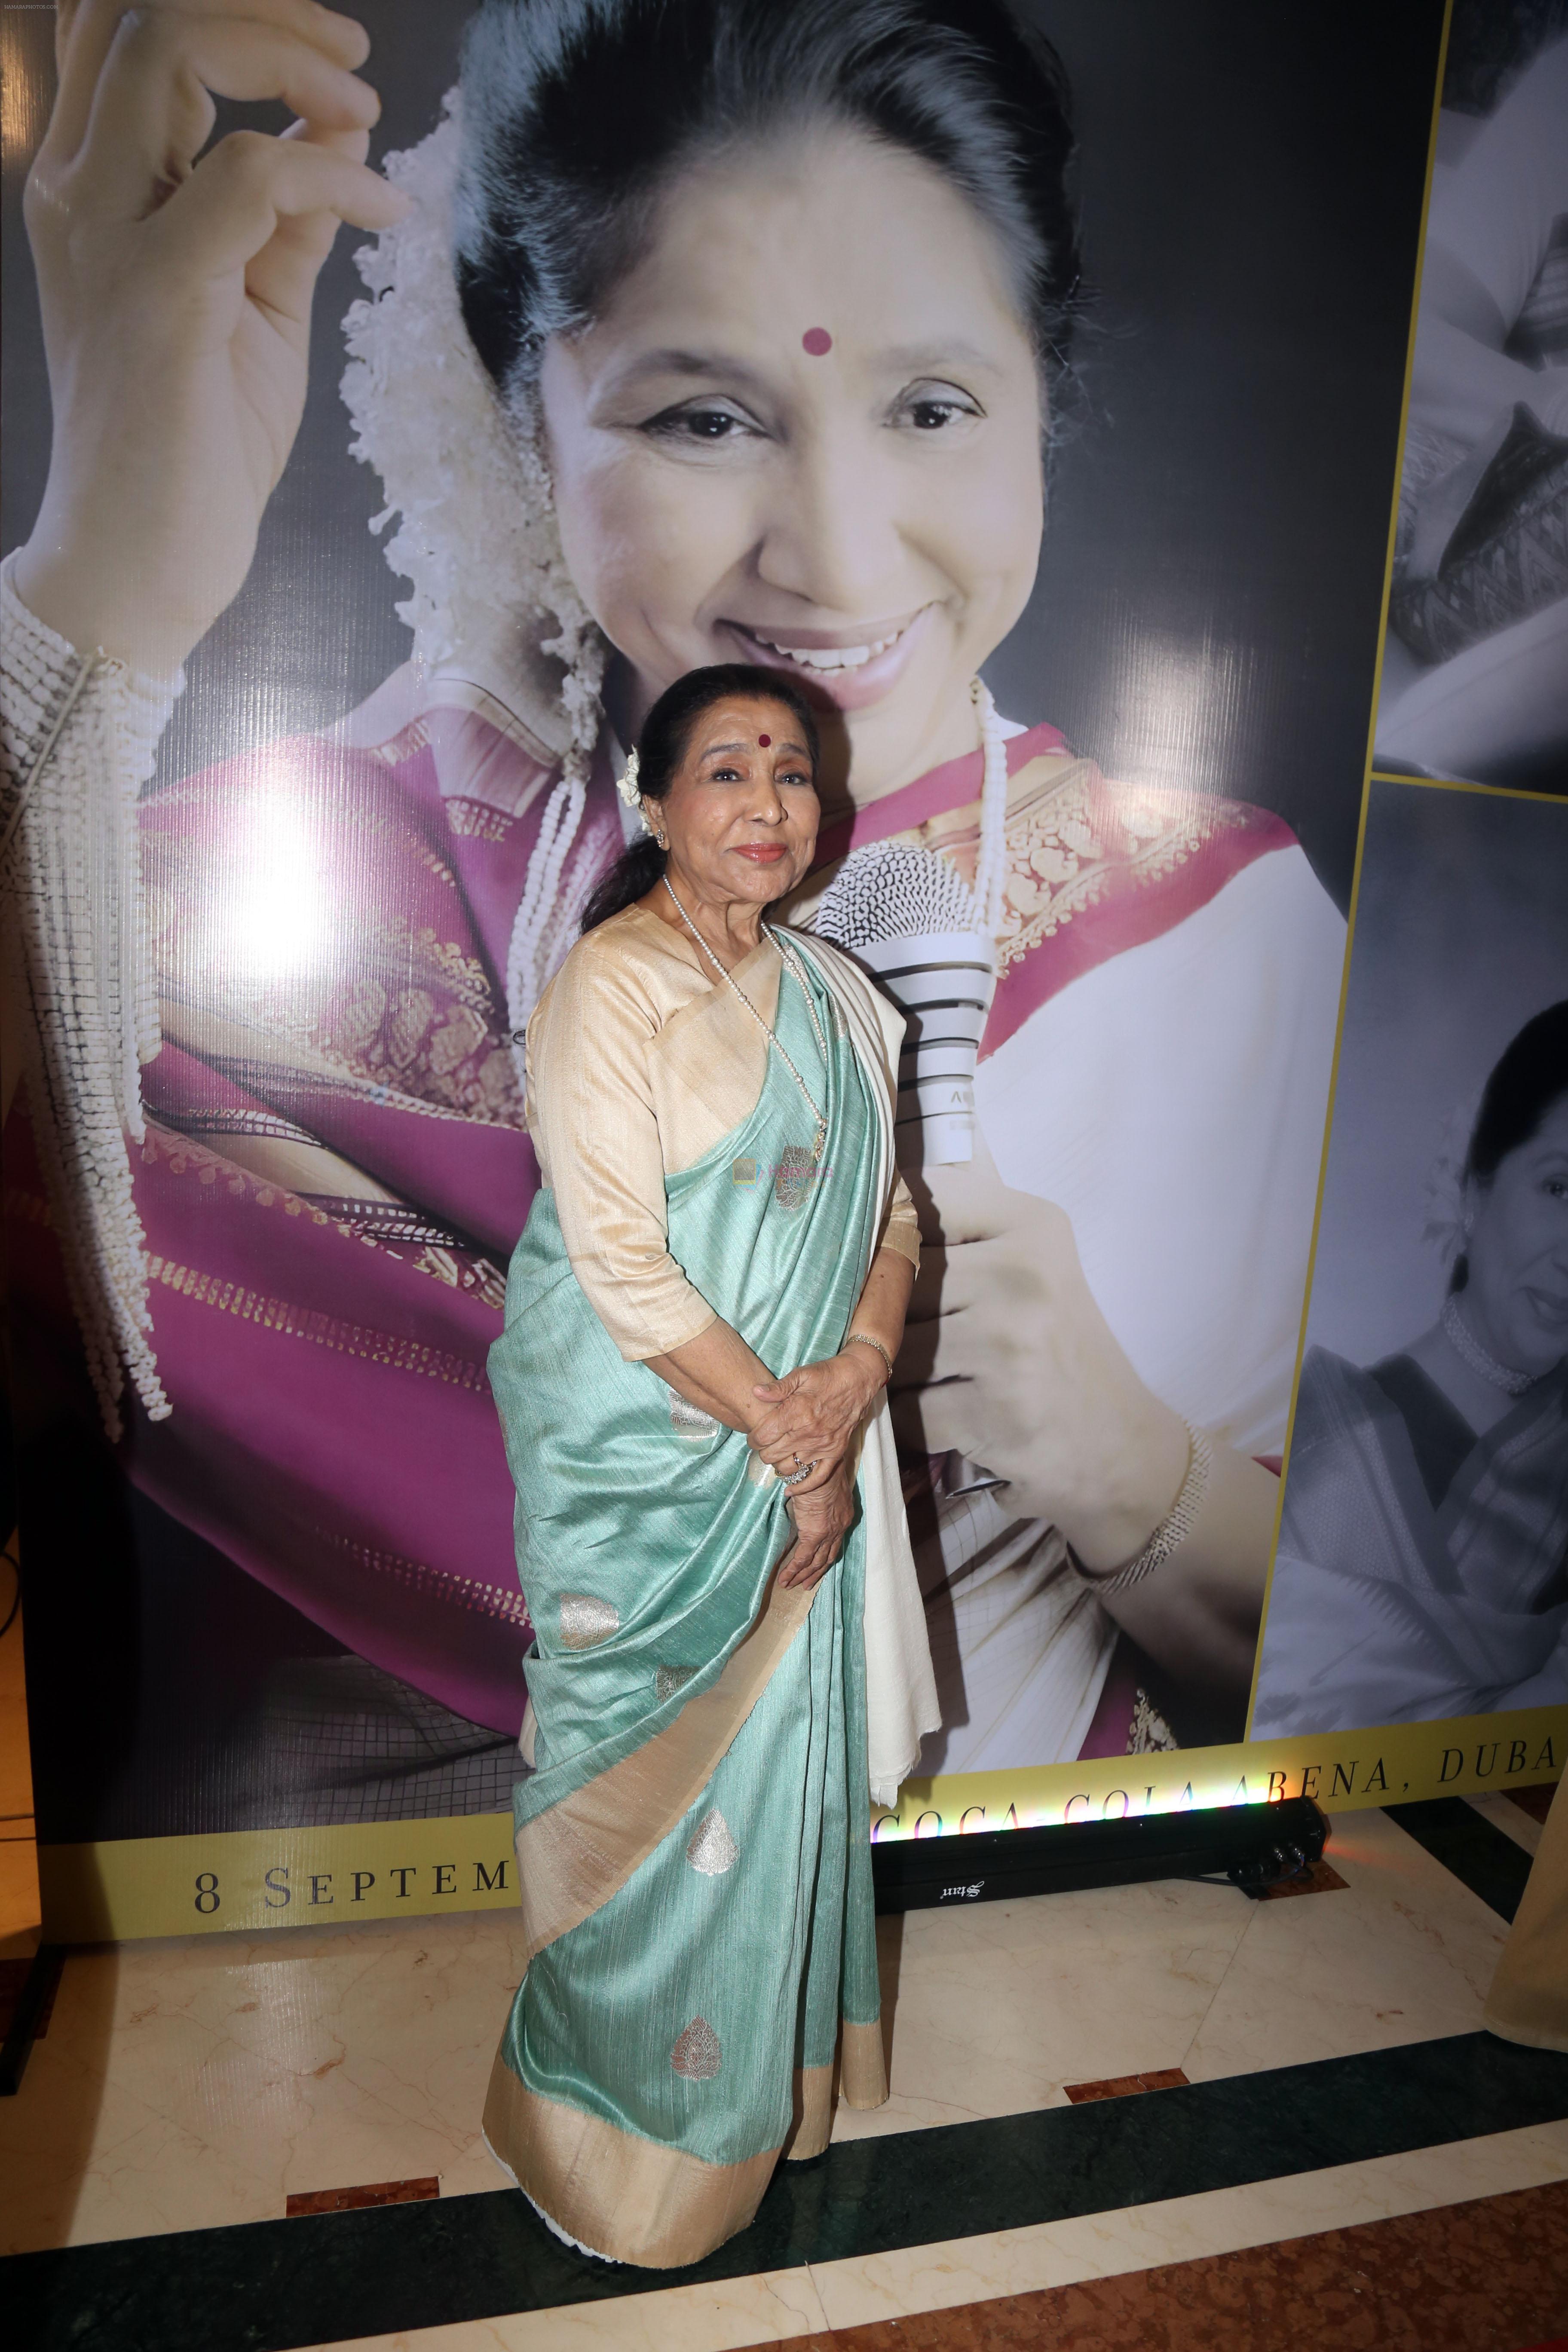 Asha Bhosle at the Press Conference for Asha@90 Live In Concert in Dubai on 8th August 2023